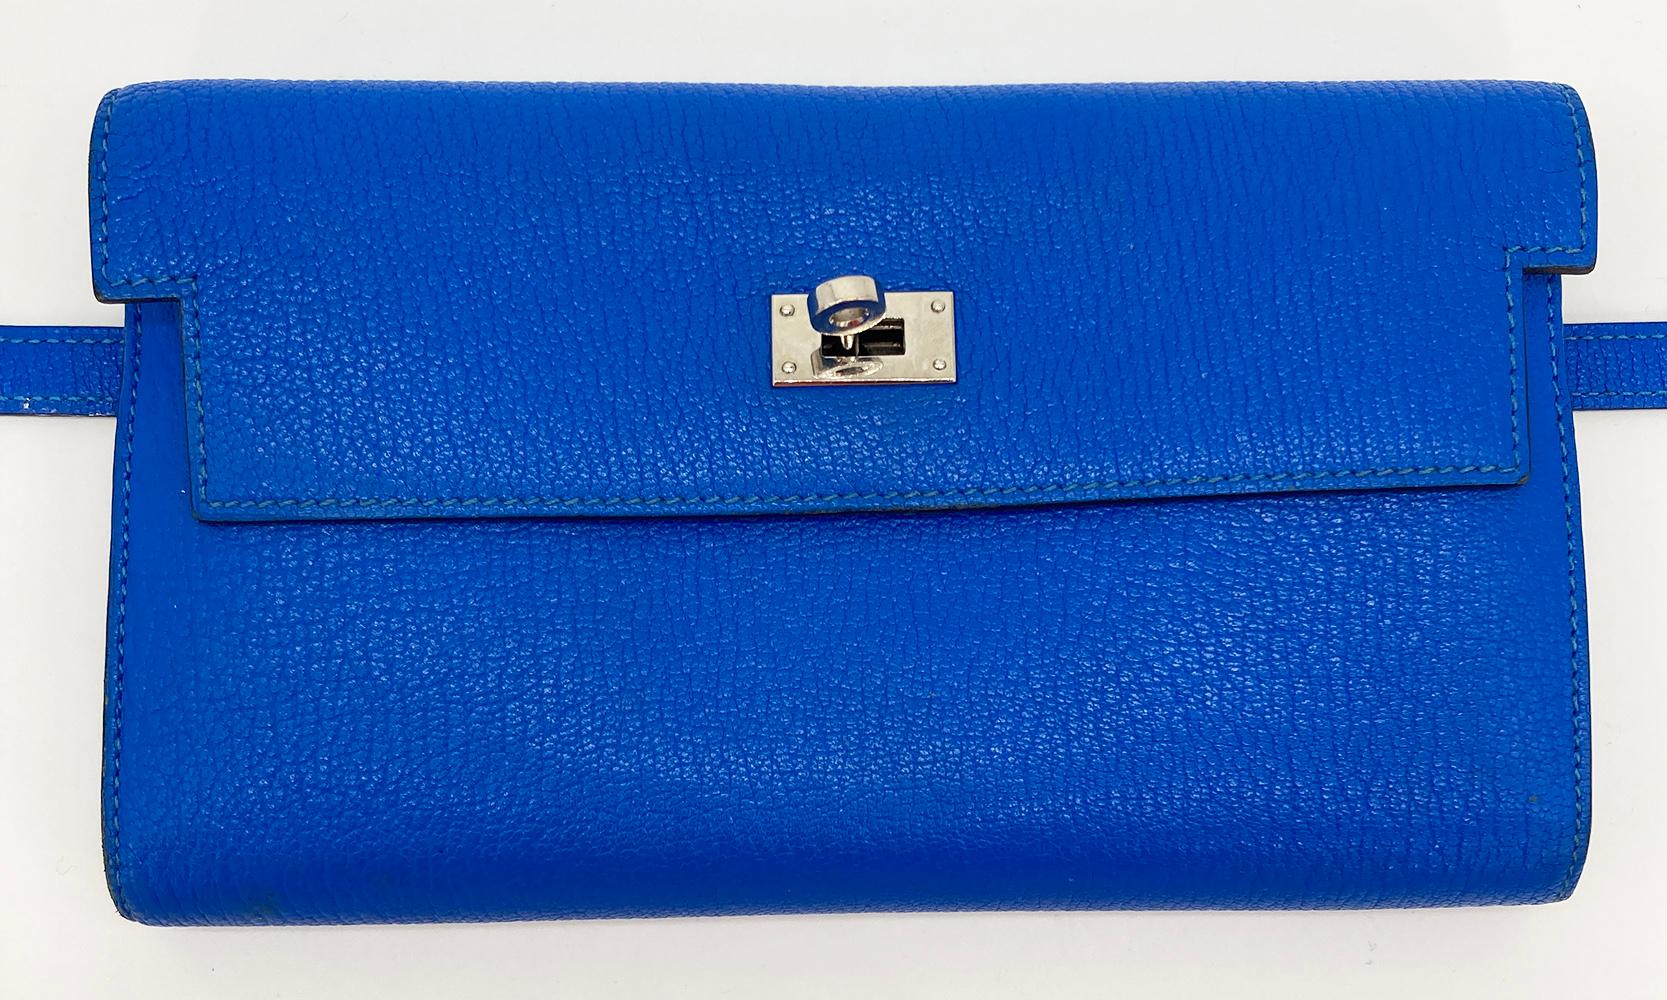 NWOT Hermes Kelly Classic Wallet Mysore Bleu Electrique  In Excellent Condition For Sale In Philadelphia, PA